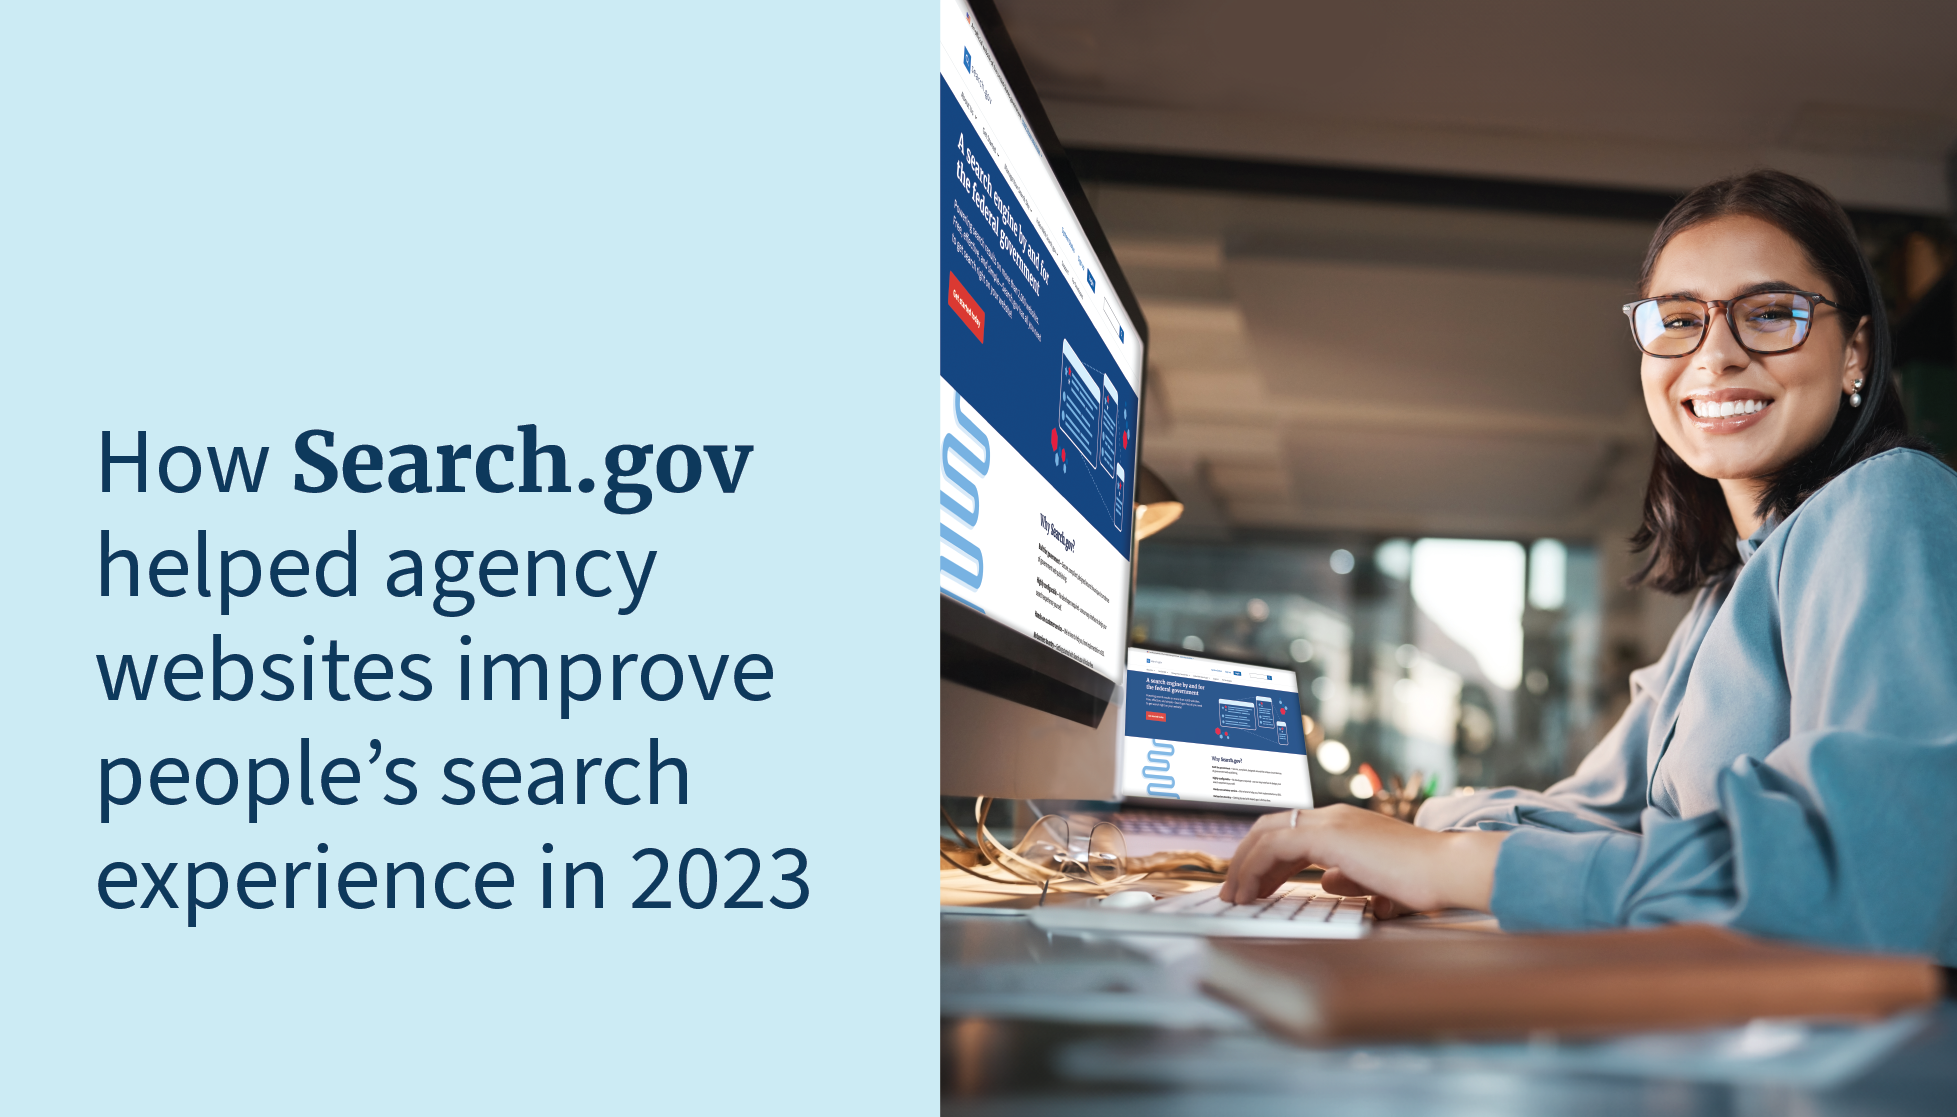 The title "How Search.gov helped agency websites improve people's search experience" next to a woman smiling at her computer logged into Search.gov.